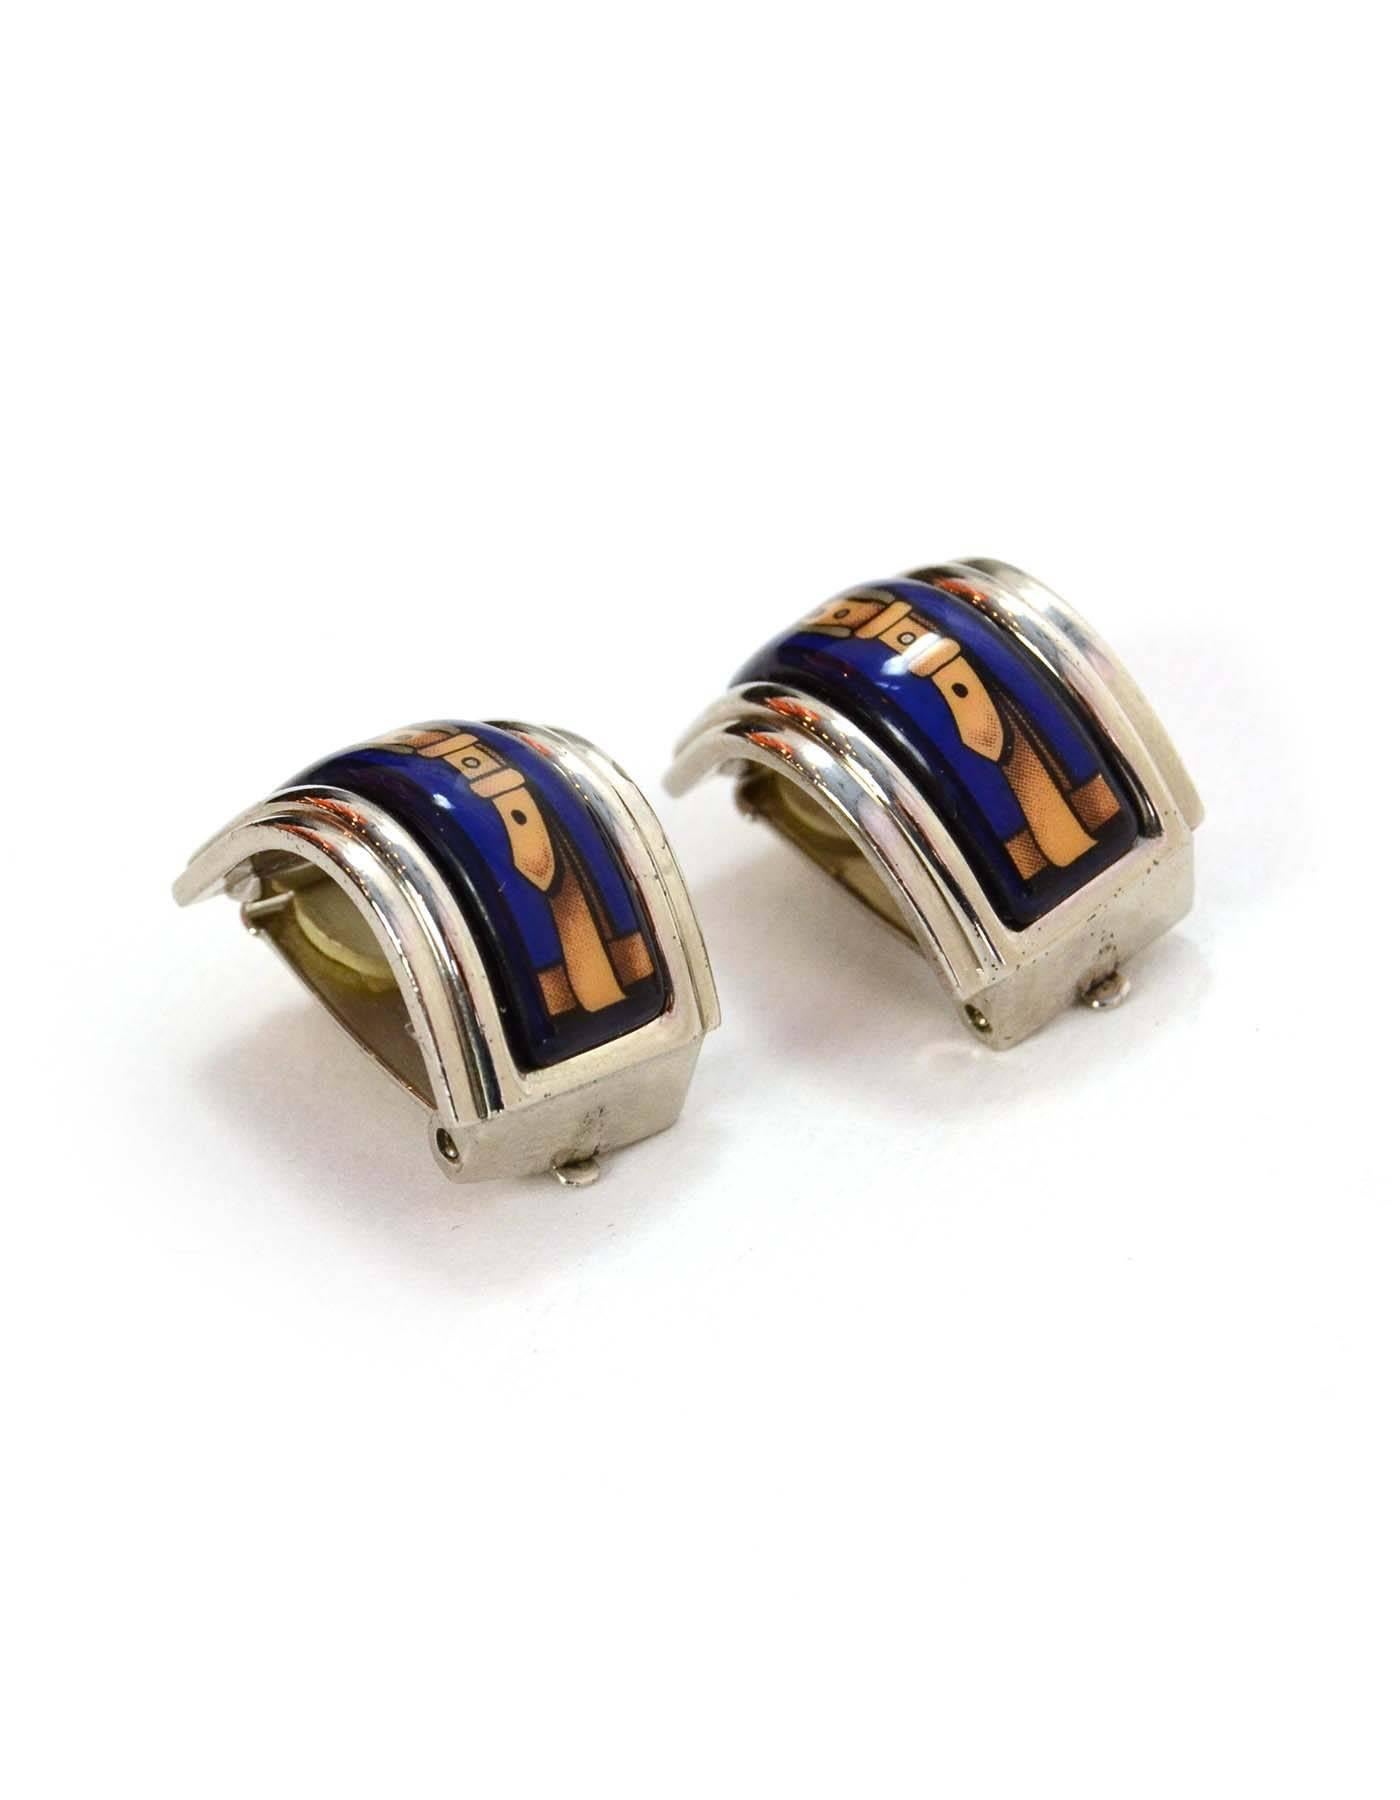 Hermes Blue Enamel Clip On Earrings 
Featurse tan buckle printed in center of blue enamel
Color: Blue, tan and silvertone
Materials: Palladium and enamel
Closure: Clip on
Stamp: Hermes
Overall Condition: Excellent pre-owned